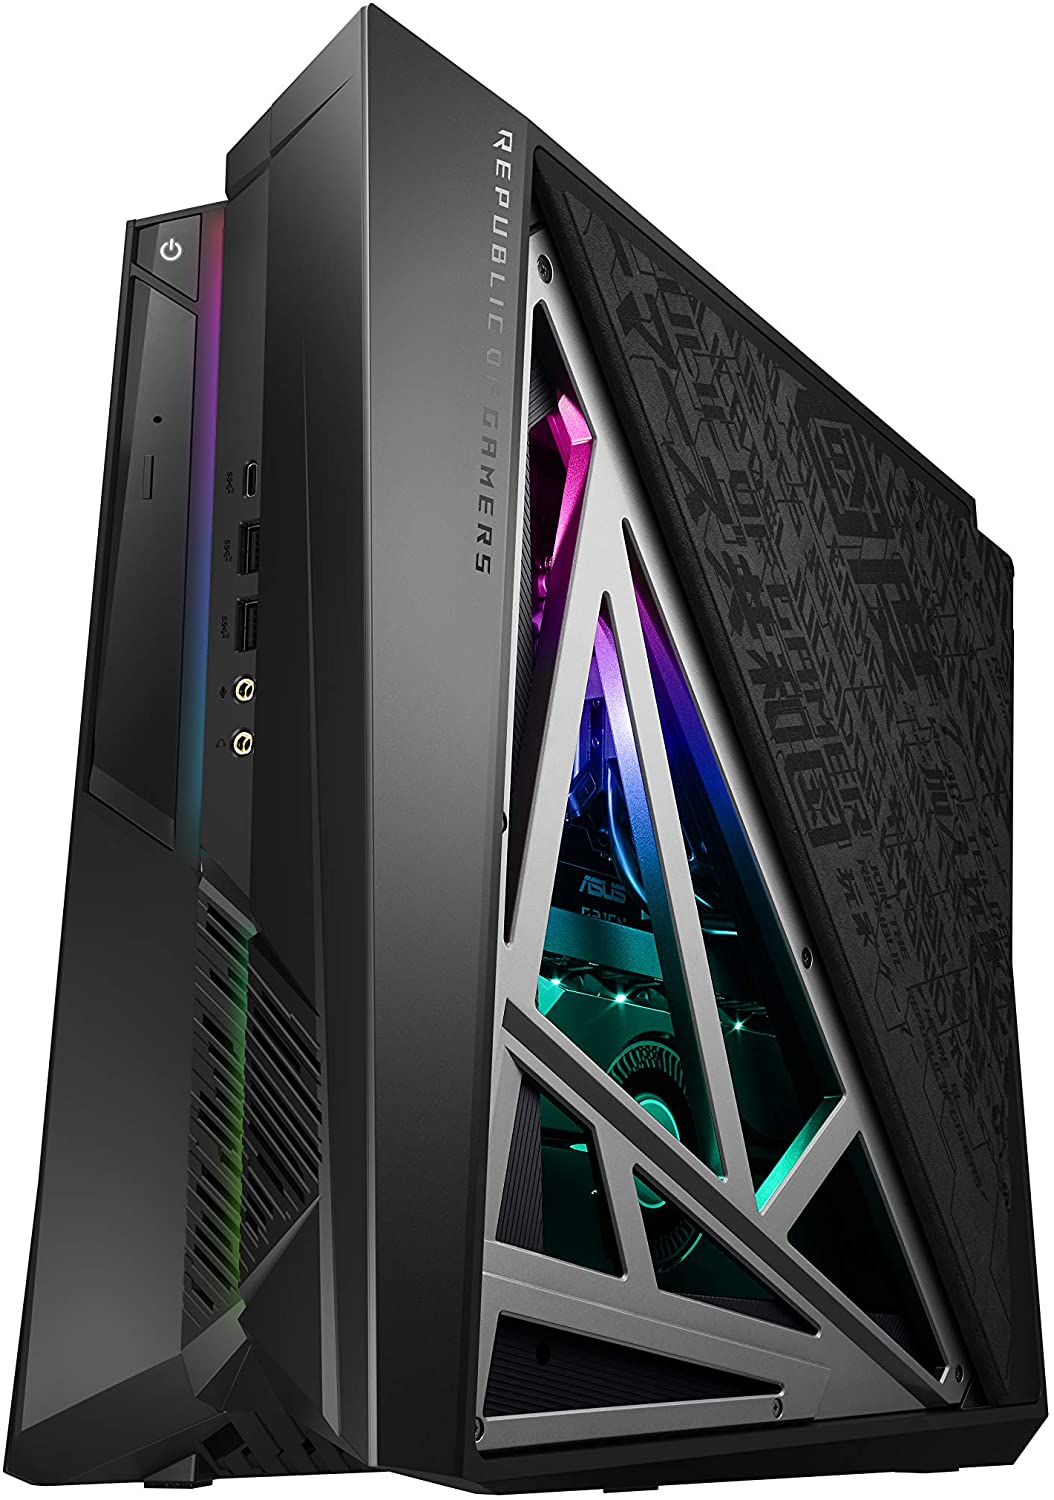  Best Gaming Pc Computer Brands for Small Bedroom